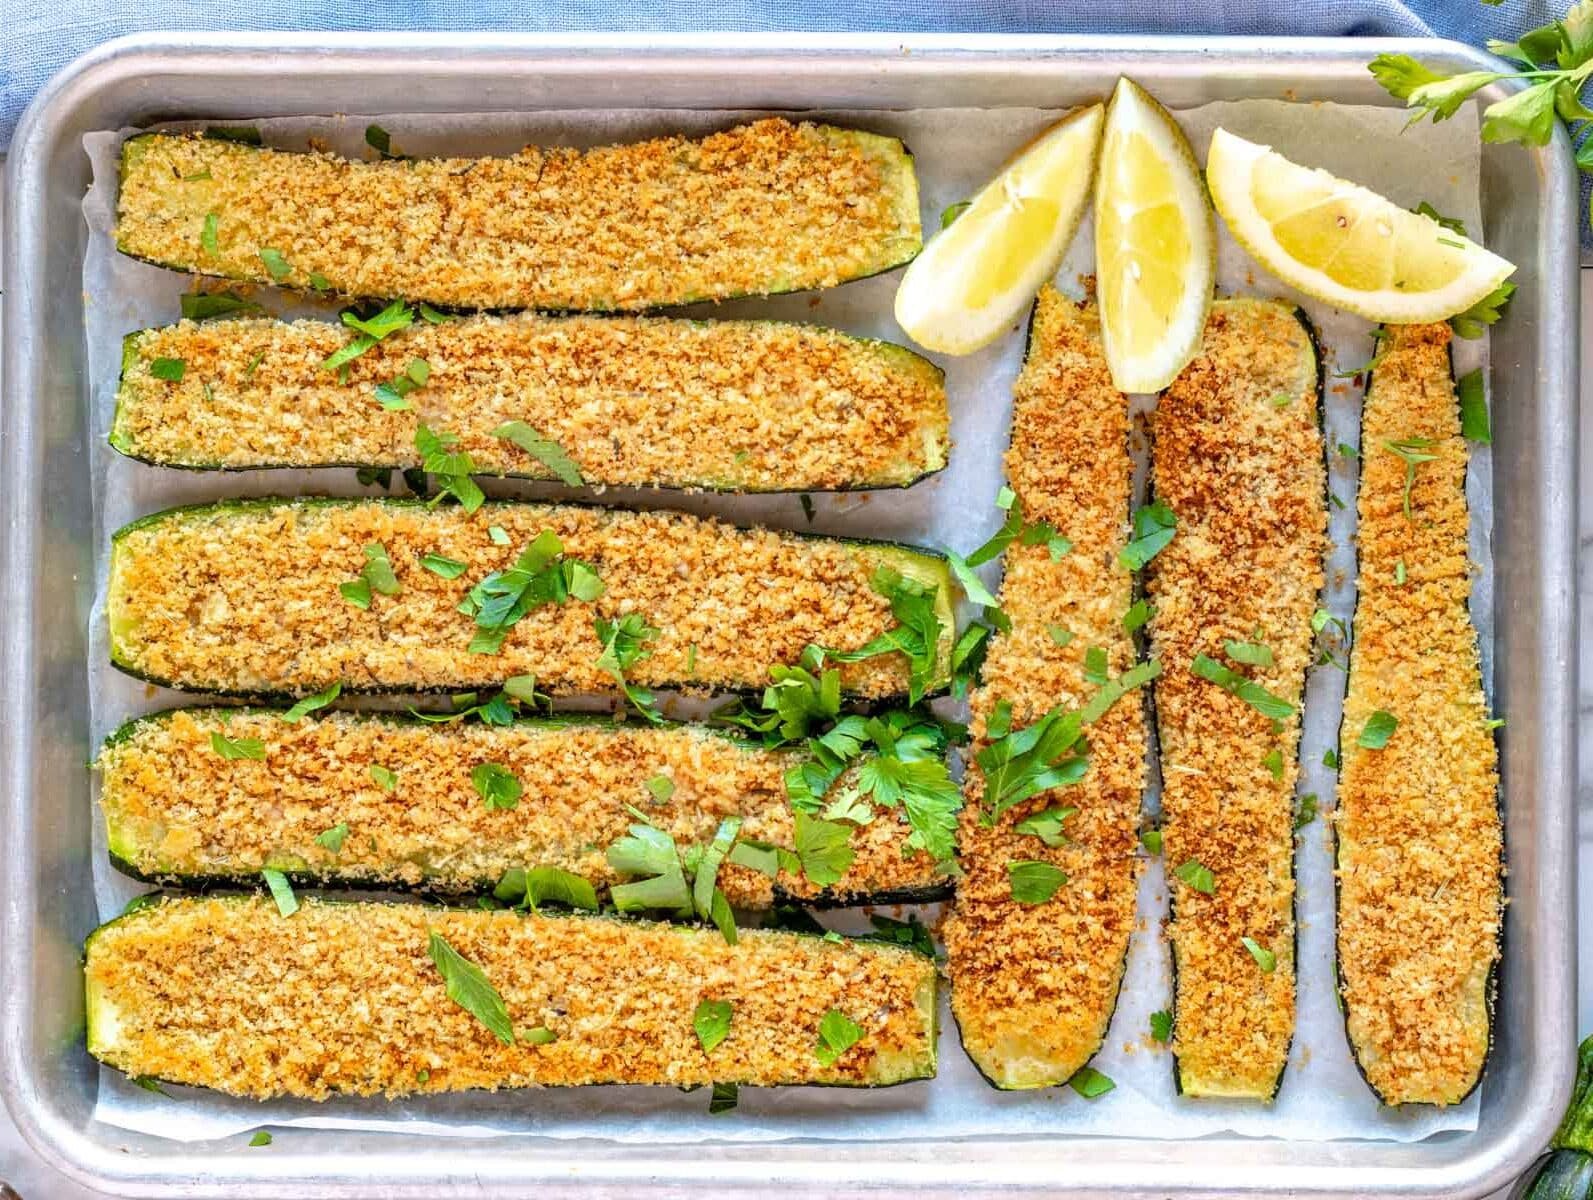 roasted zucchini on a silver tray with lemon wedges